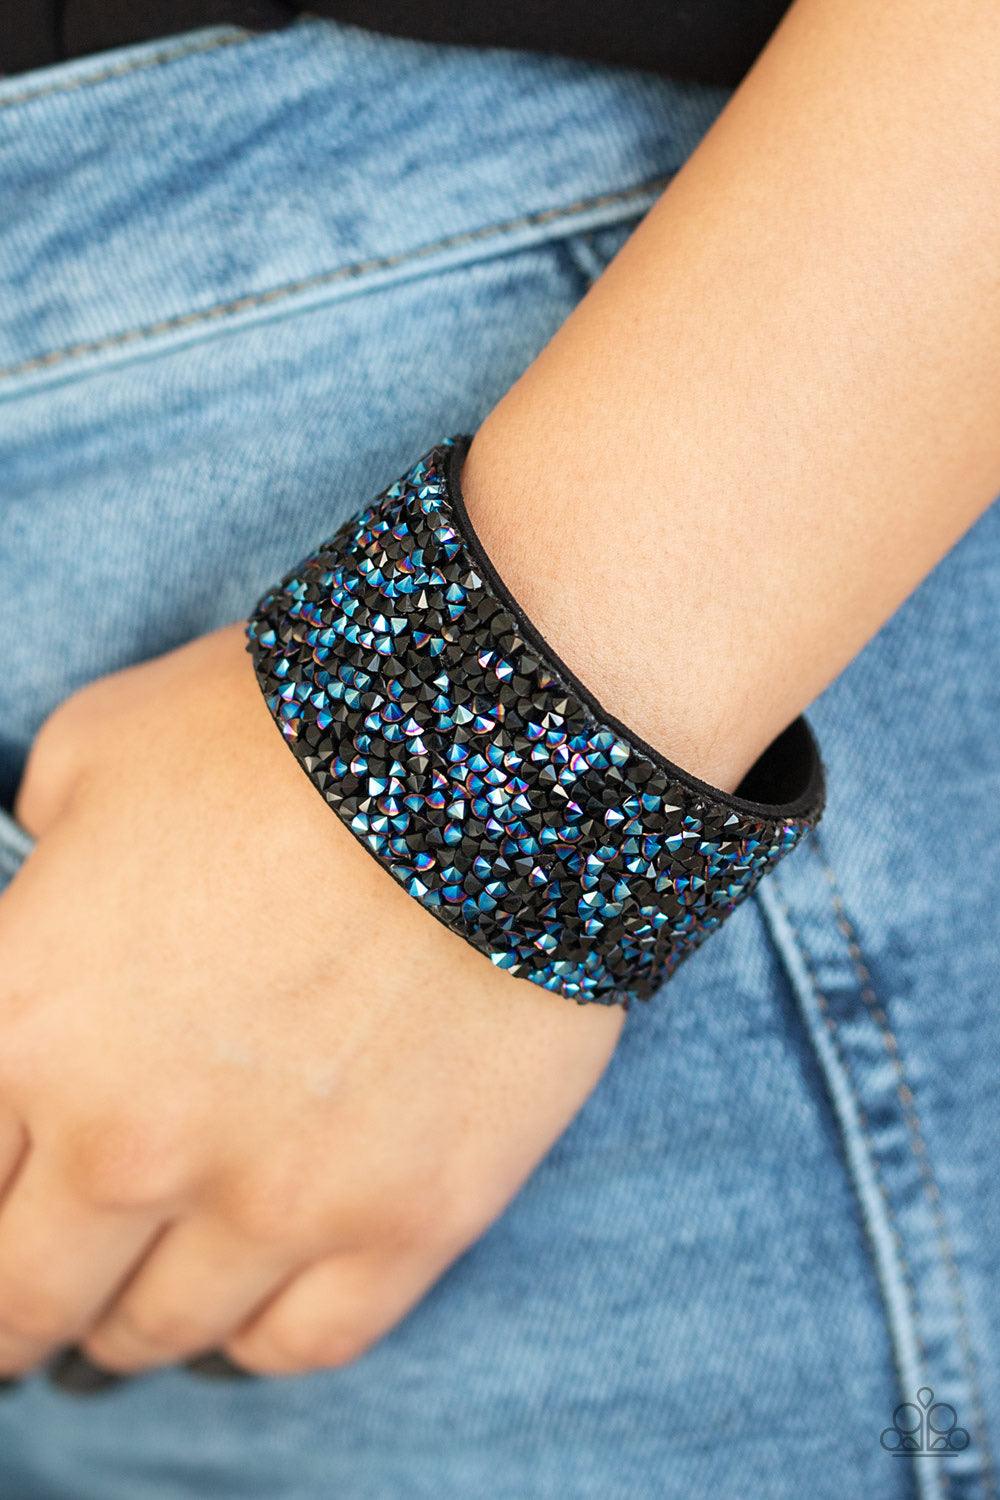 Paparazzi Accessories Rhinestone Runway - Multi Dainty black and metallic blue rhinestone prisms are sprinkled across the center of a thick black suede band, creating a sassy dazzle around the wrist. Features an adjustable snap closure. Jewelry